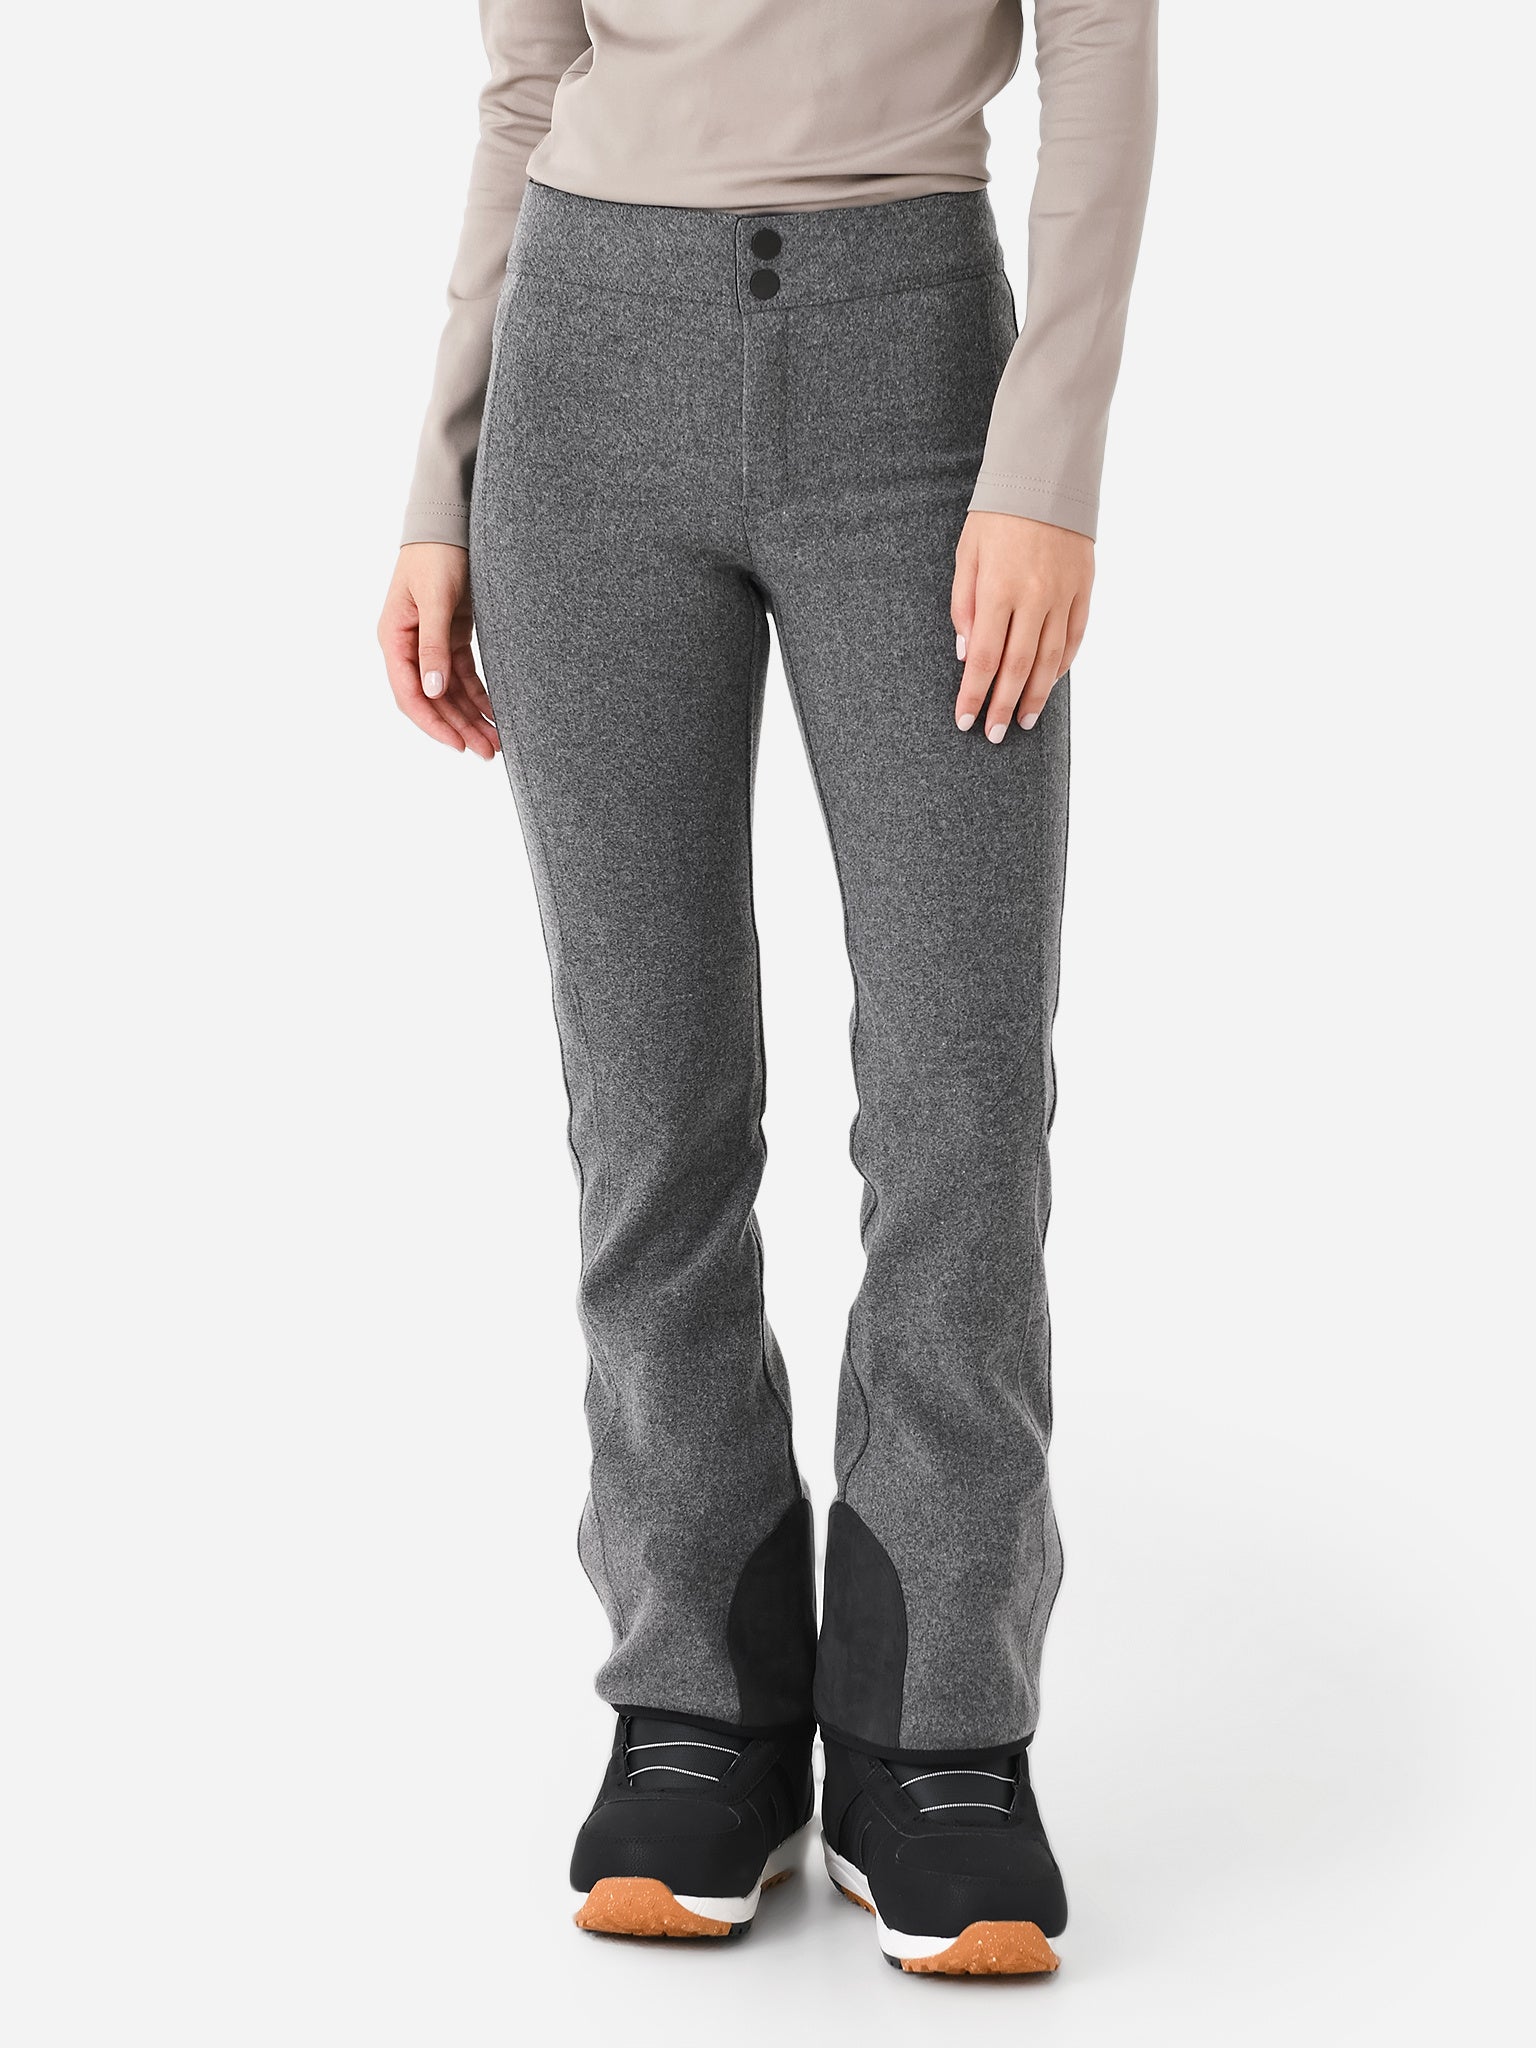 The North Face Apex STH Ski Pant (Women's)